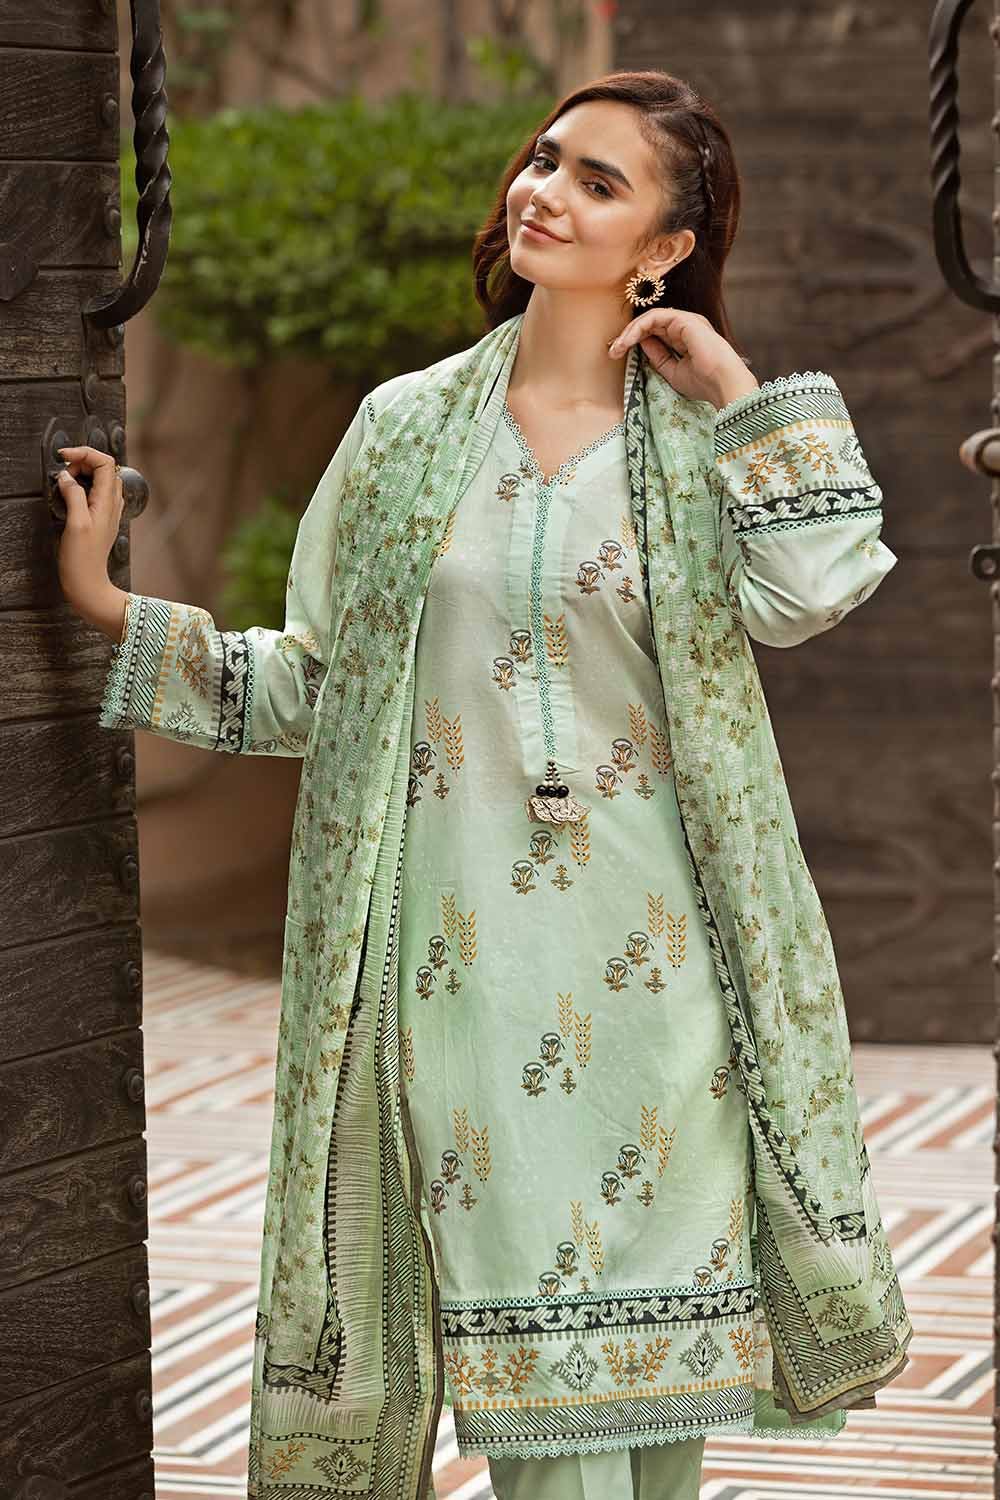 Gul Ahmed 3PC Printed Lawn Unstitched Suit CL-32443 A